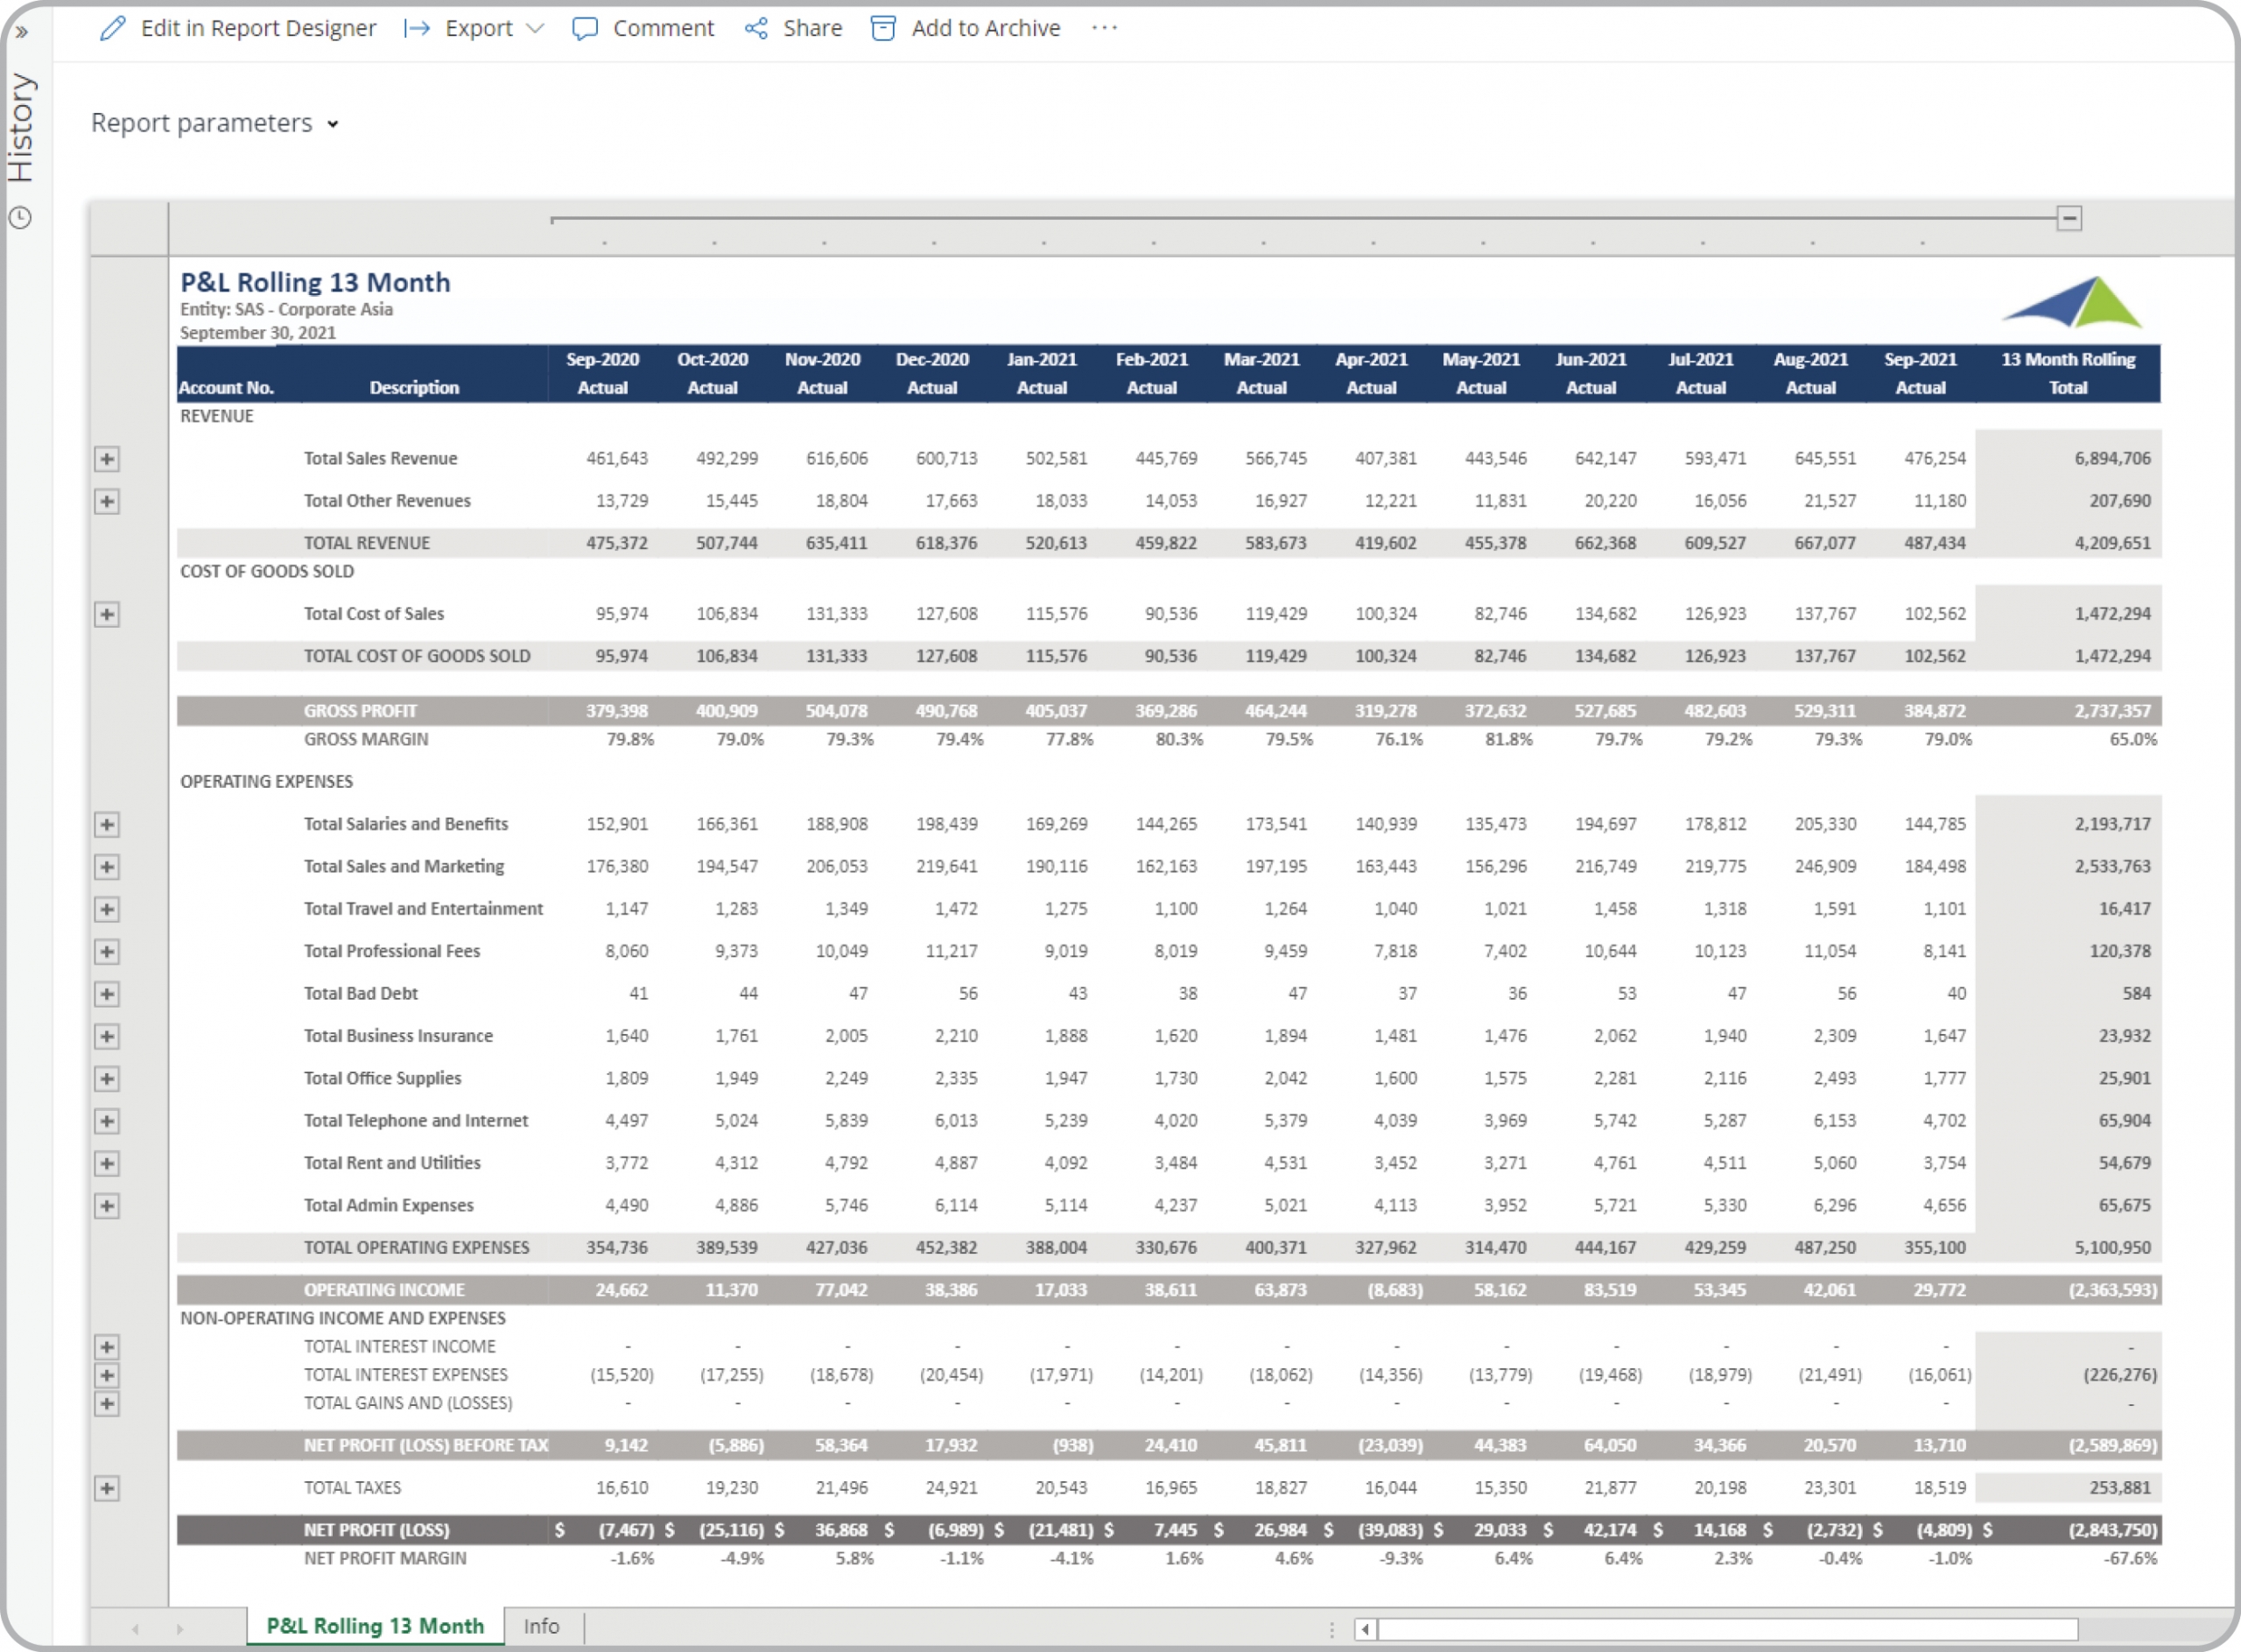 Example of a Rolling 13 Month P&L Trend Report to Streamline the Monthly Reporting Process